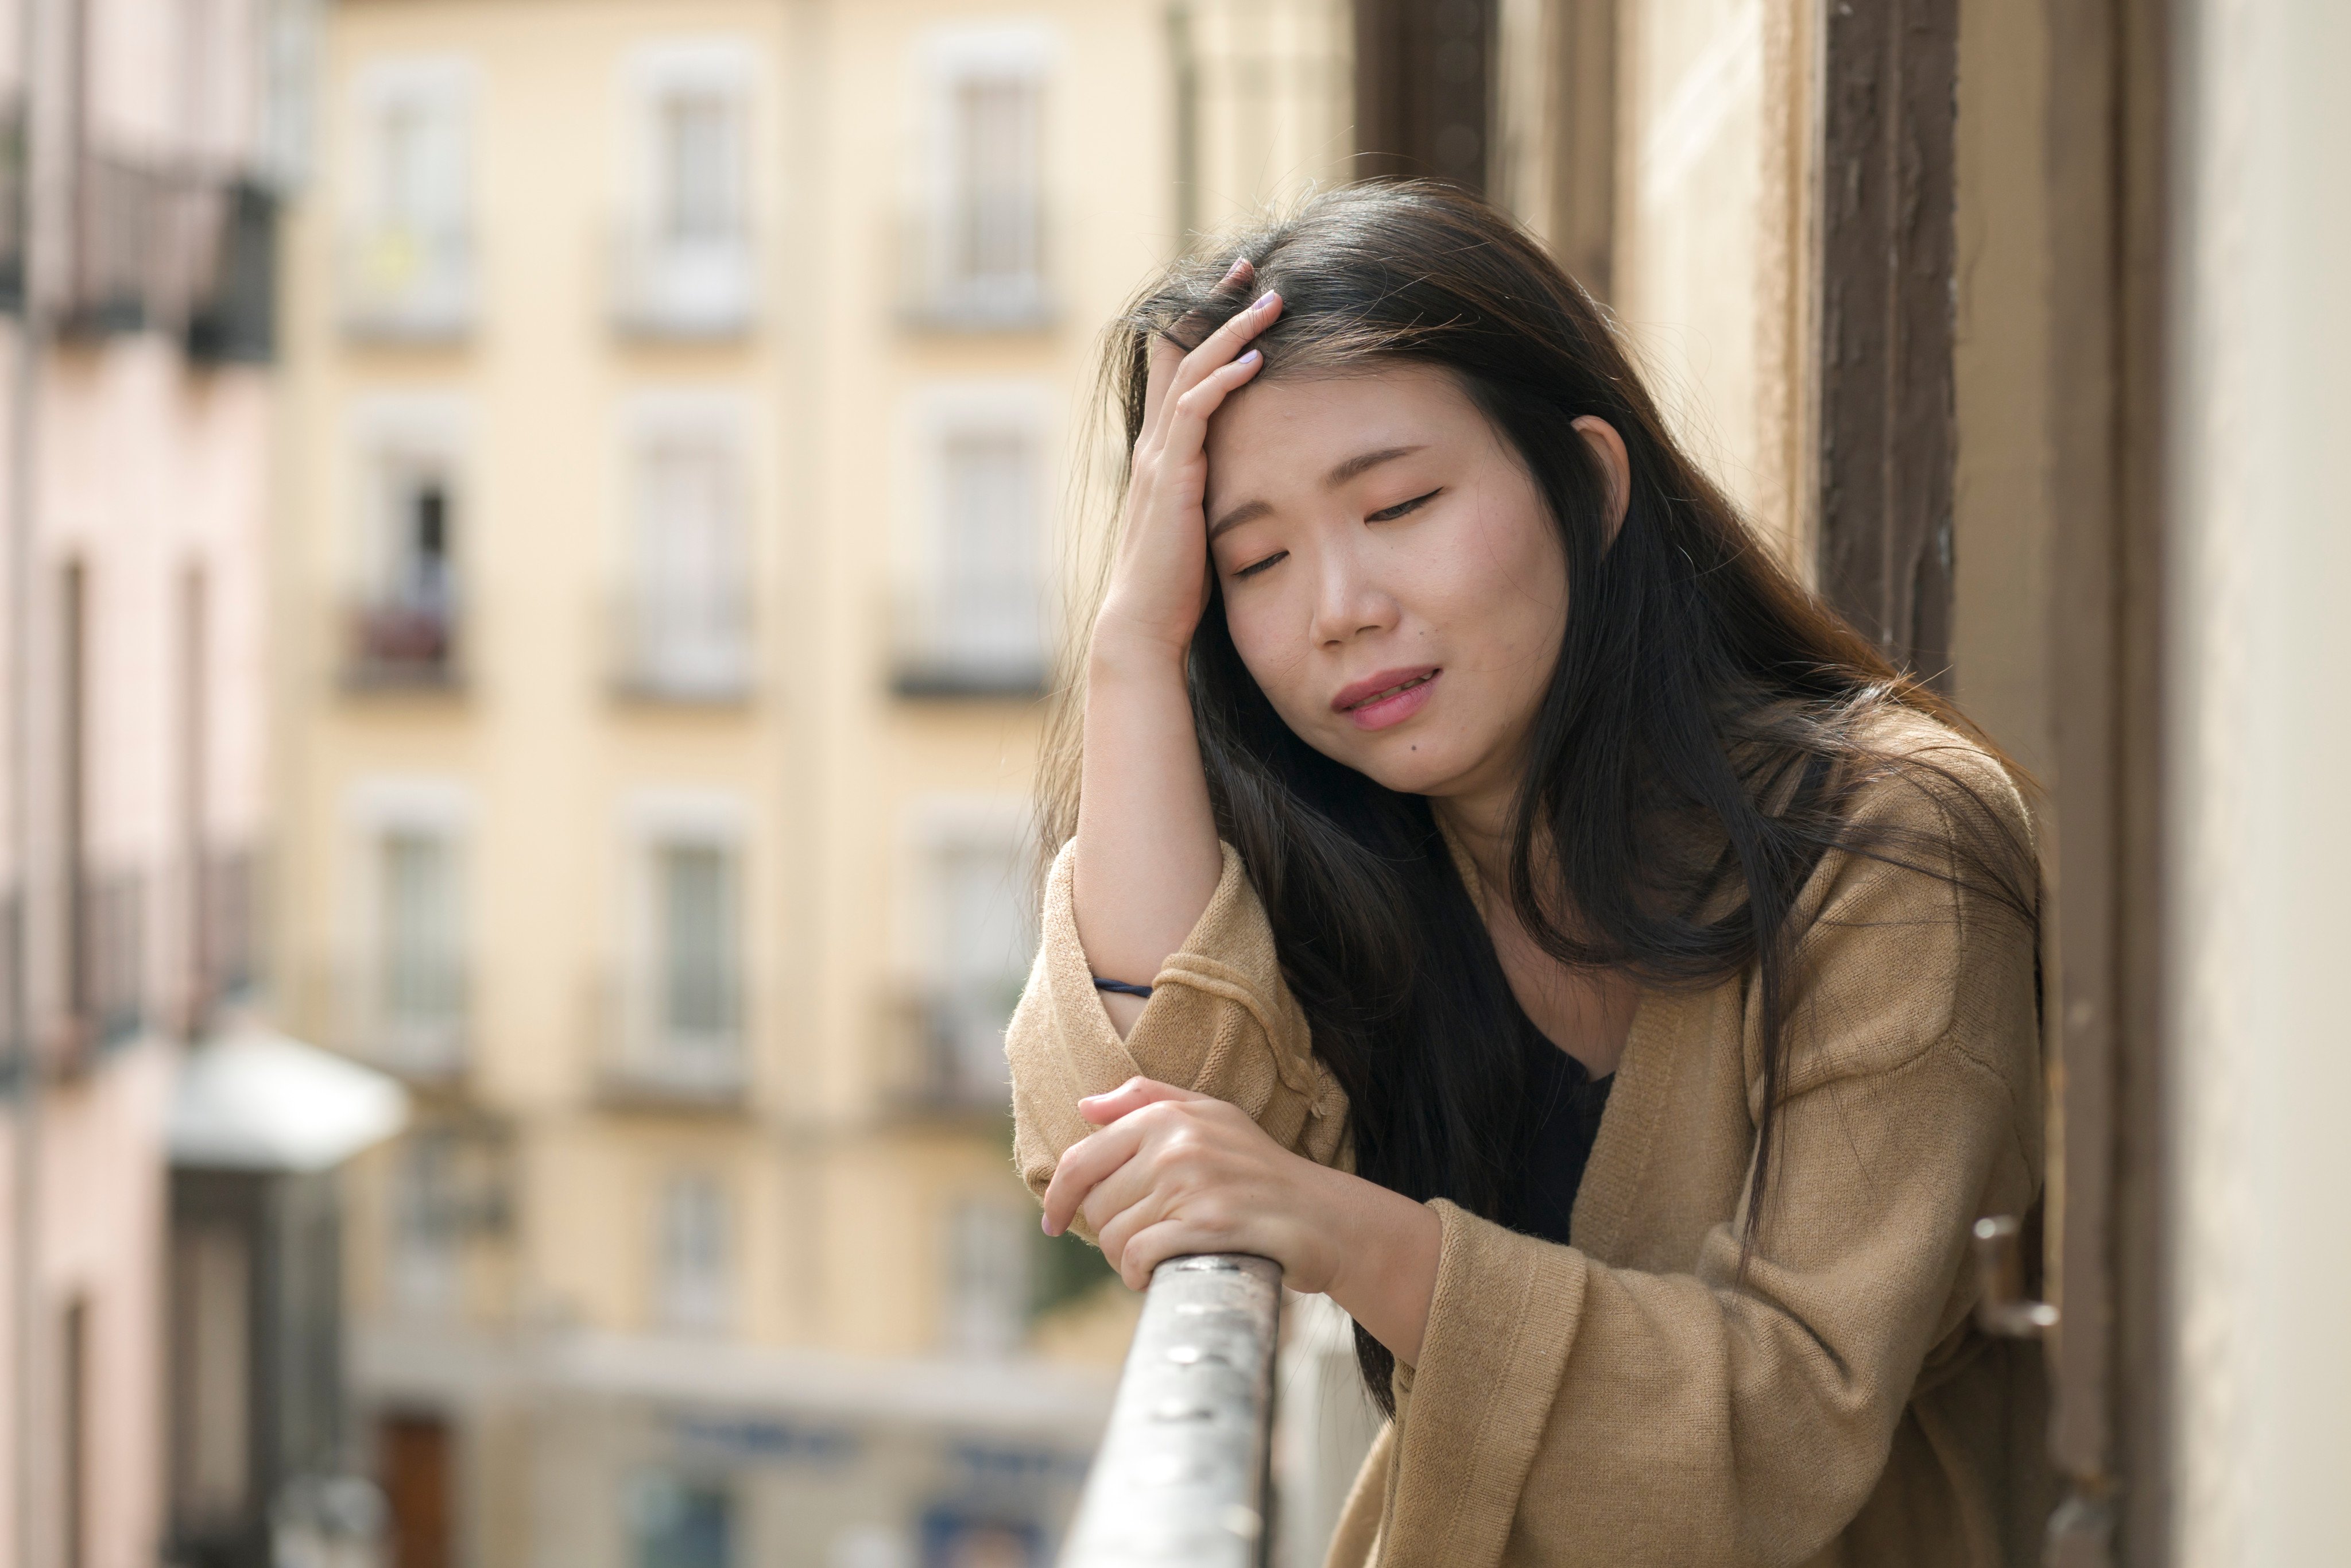 Depression affects 280 million people worldwide, yet sufferers often face discrimination thanks to misinformation and ignorance. We dispel 8 myths surrounding the condition. Photo: Shutterstock
